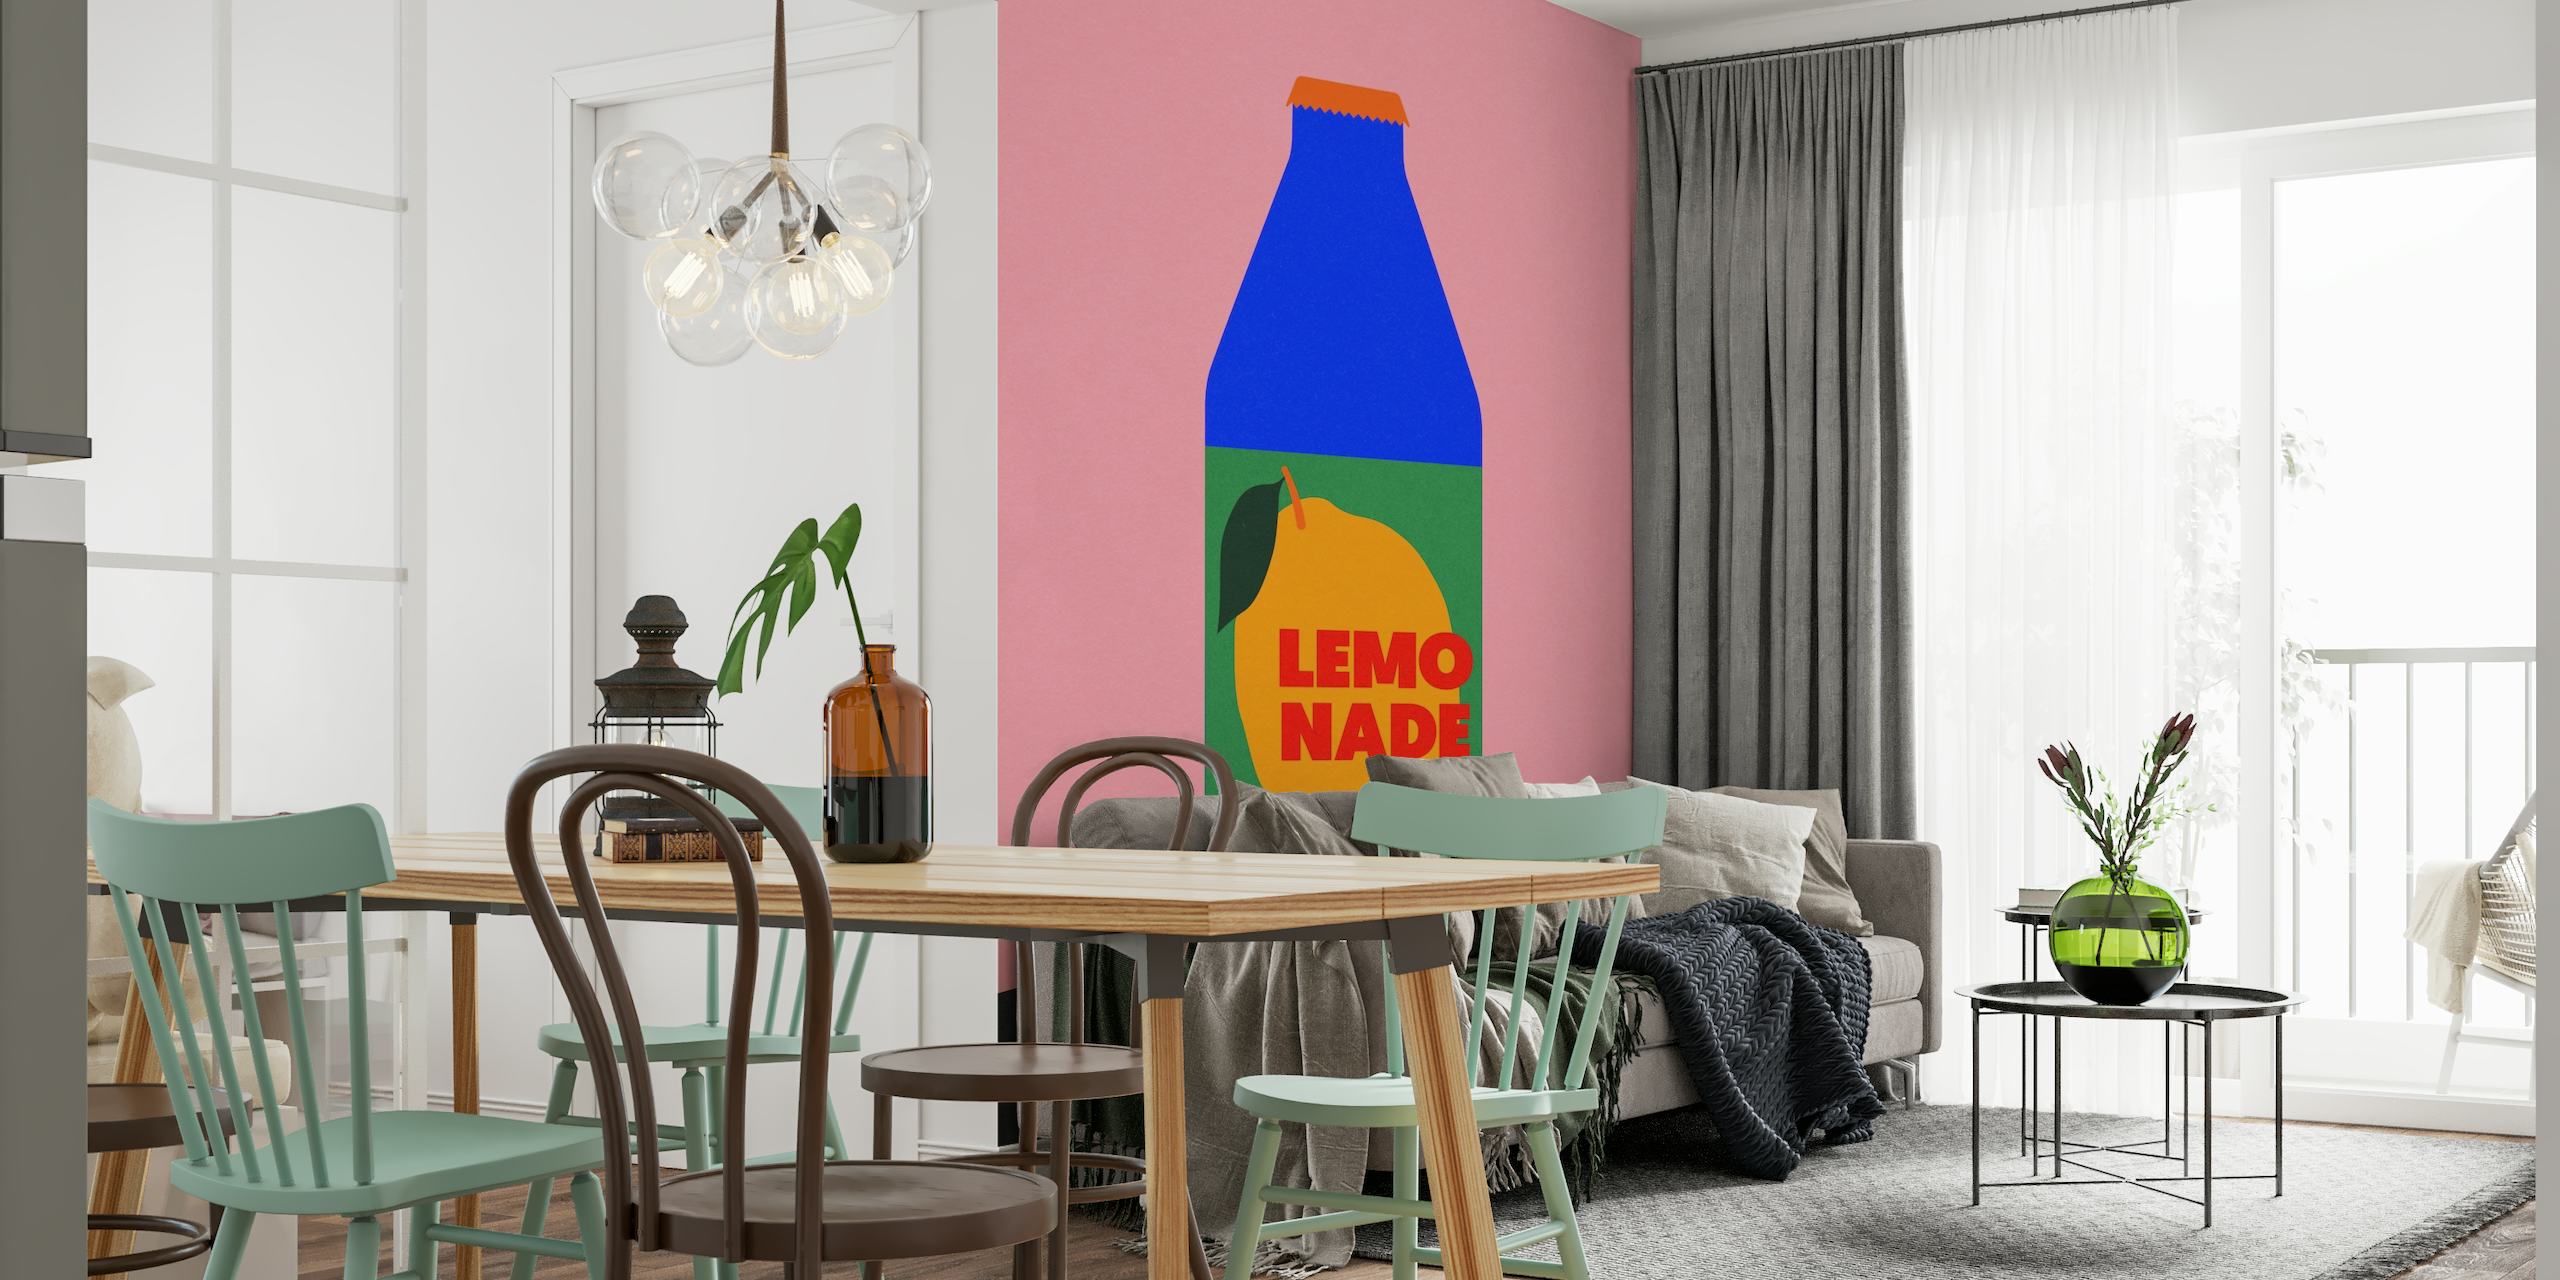 Modern 'Lemo Nade' wall mural with pink background and blue bottle illustration